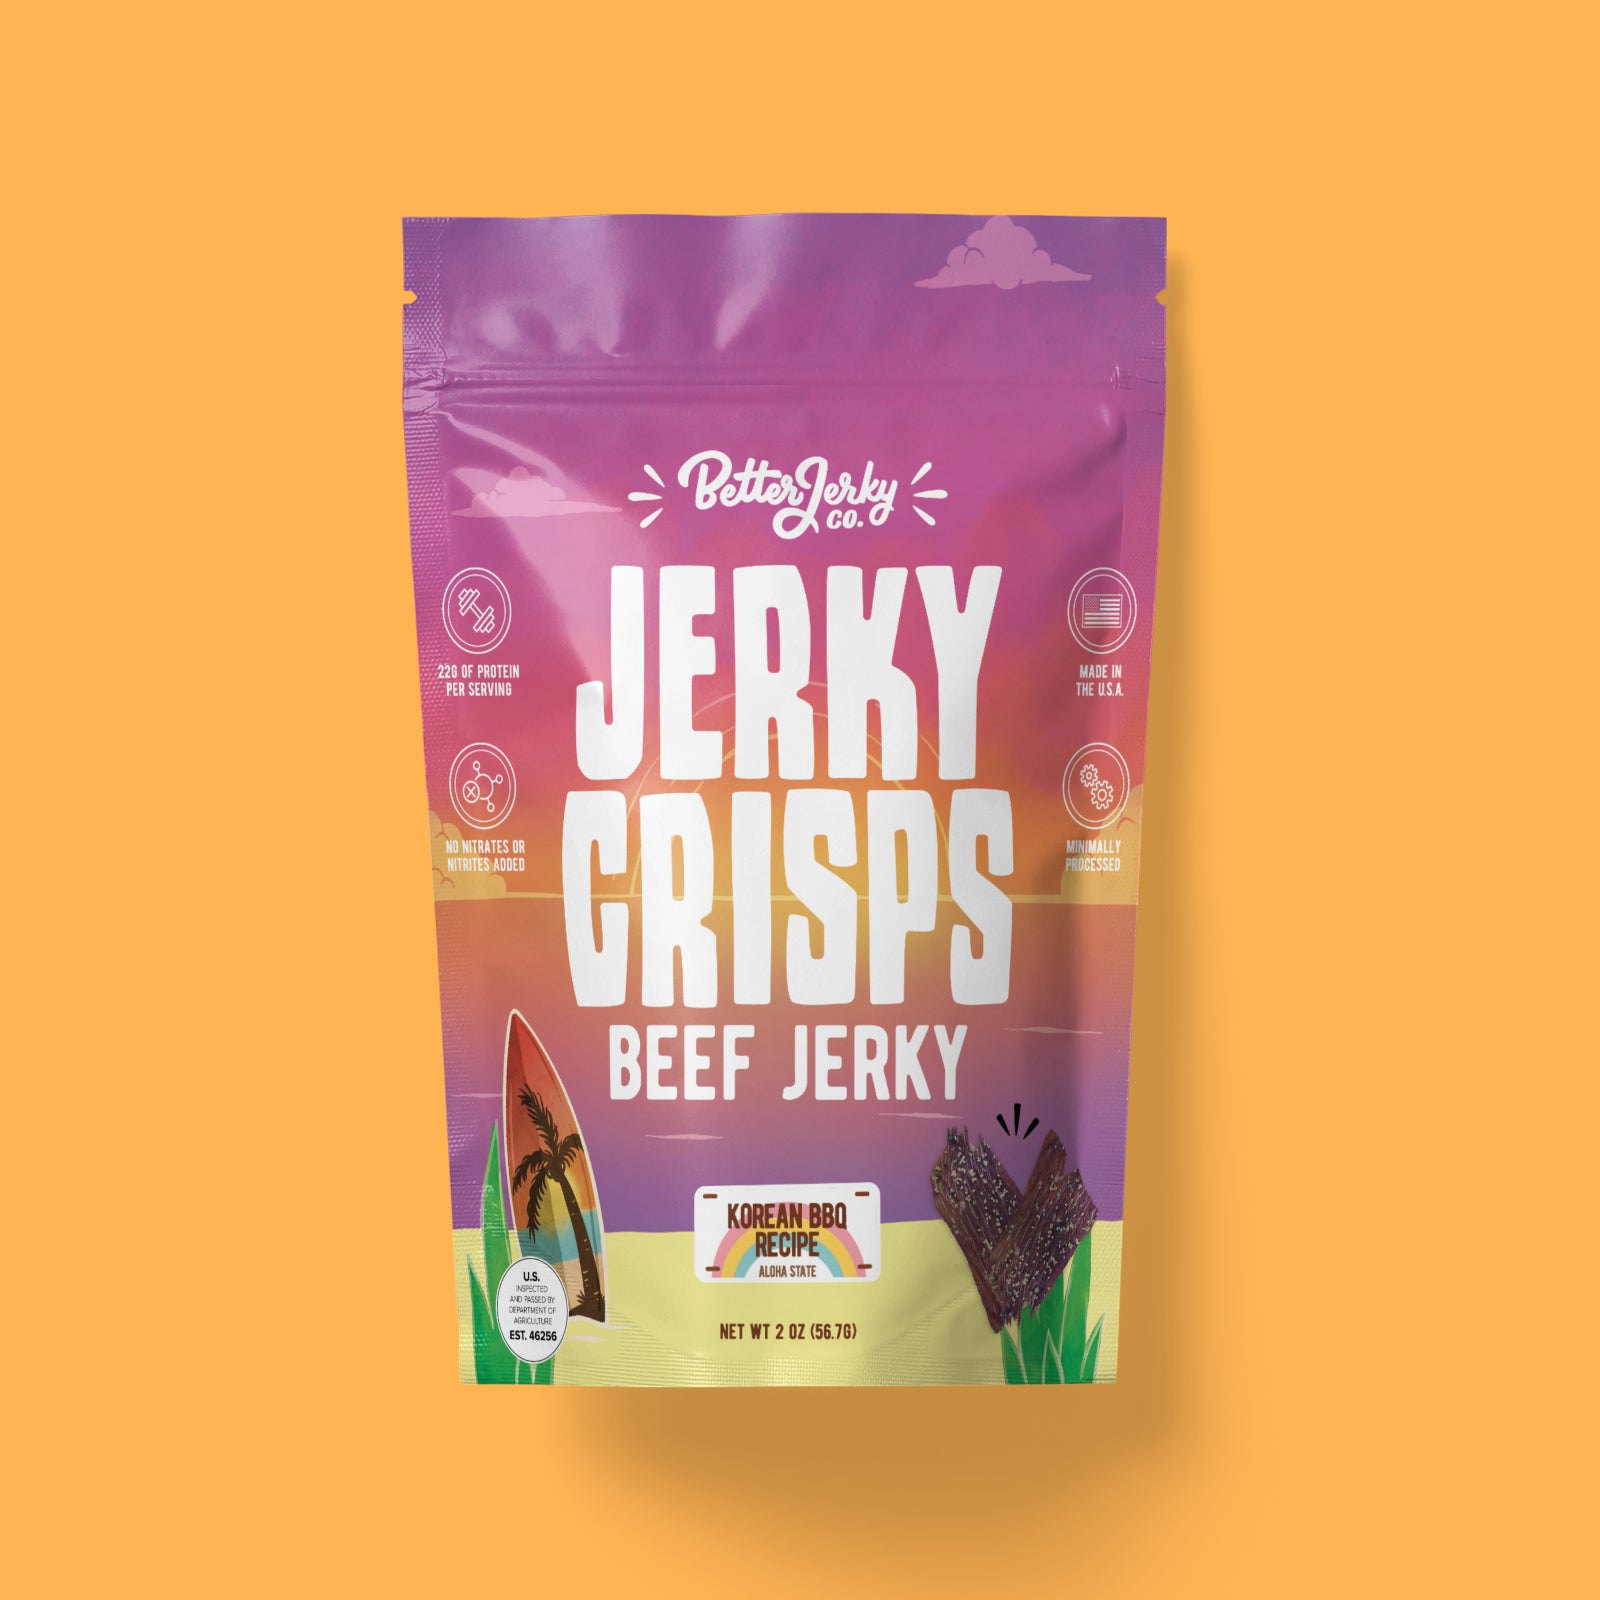 Korean BBQ flavored crispy beef jerky from Hawaii. Garlic flavored crispy beef jerky from Hawaii. These Jerky Crisps are made with premium quality beef and are keto-friendly and high in protein, which makes a healthy on-the-go snack.